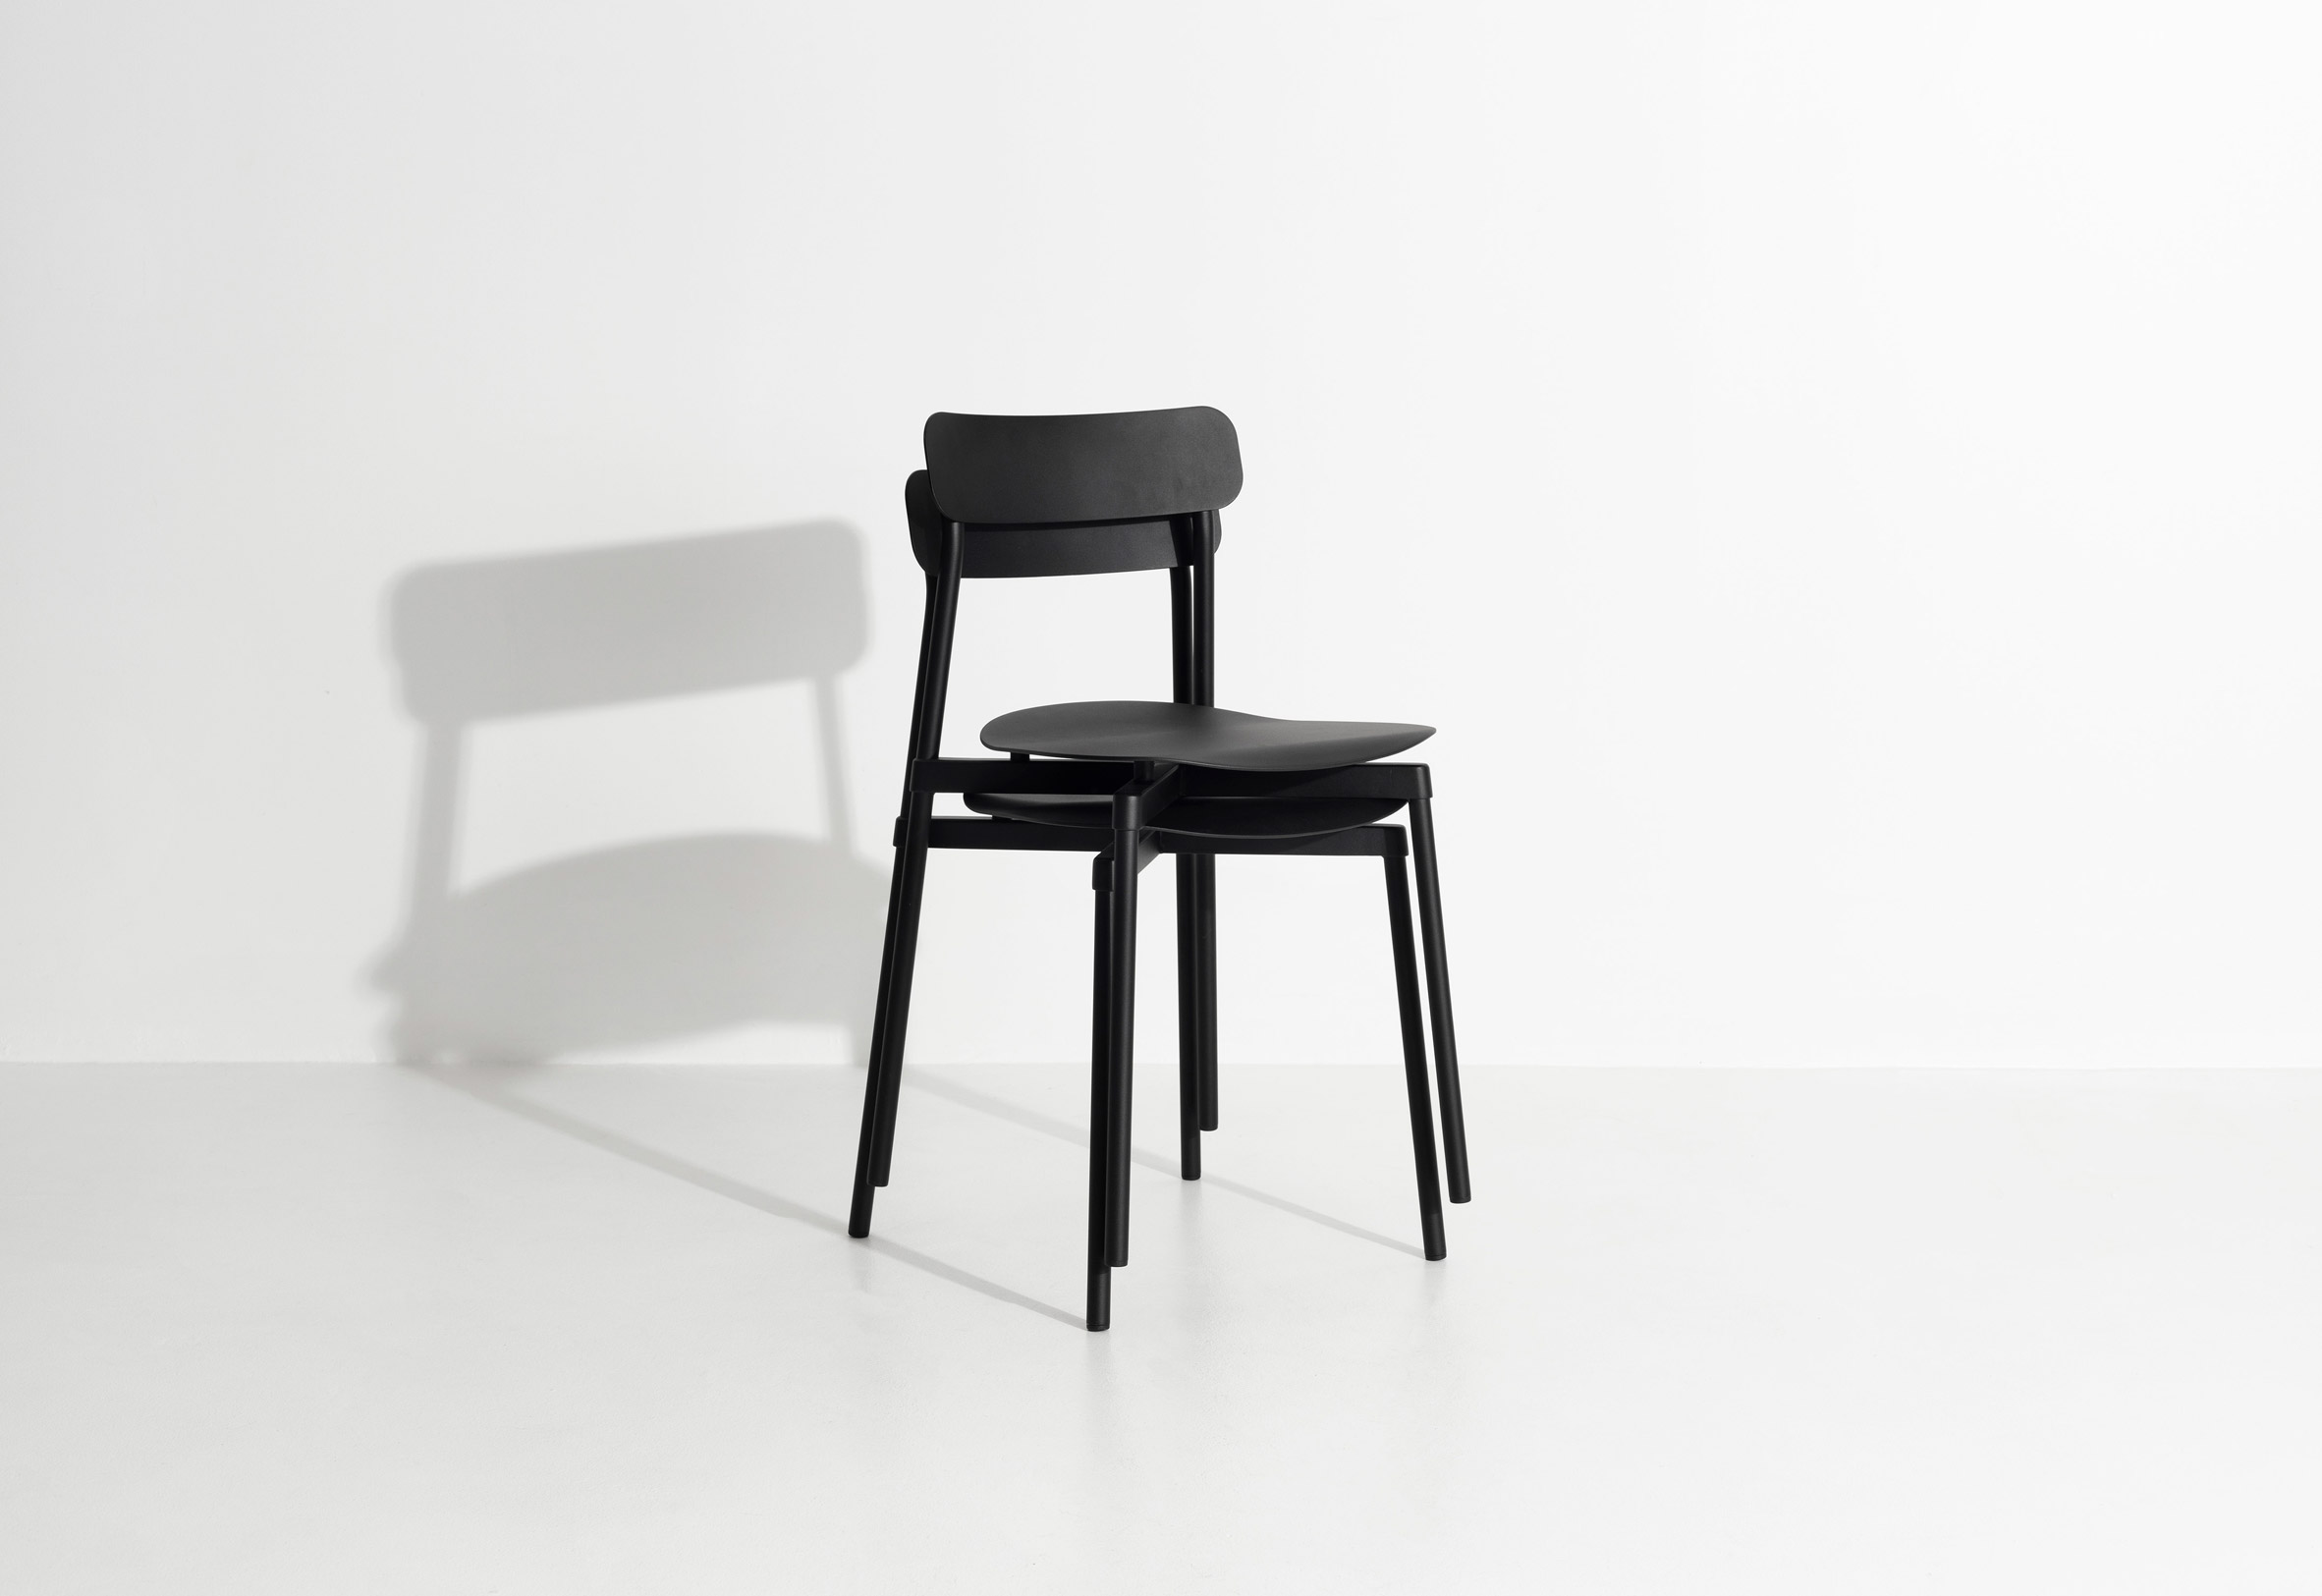 Two black Fromme chairs by Petite Friture stacked